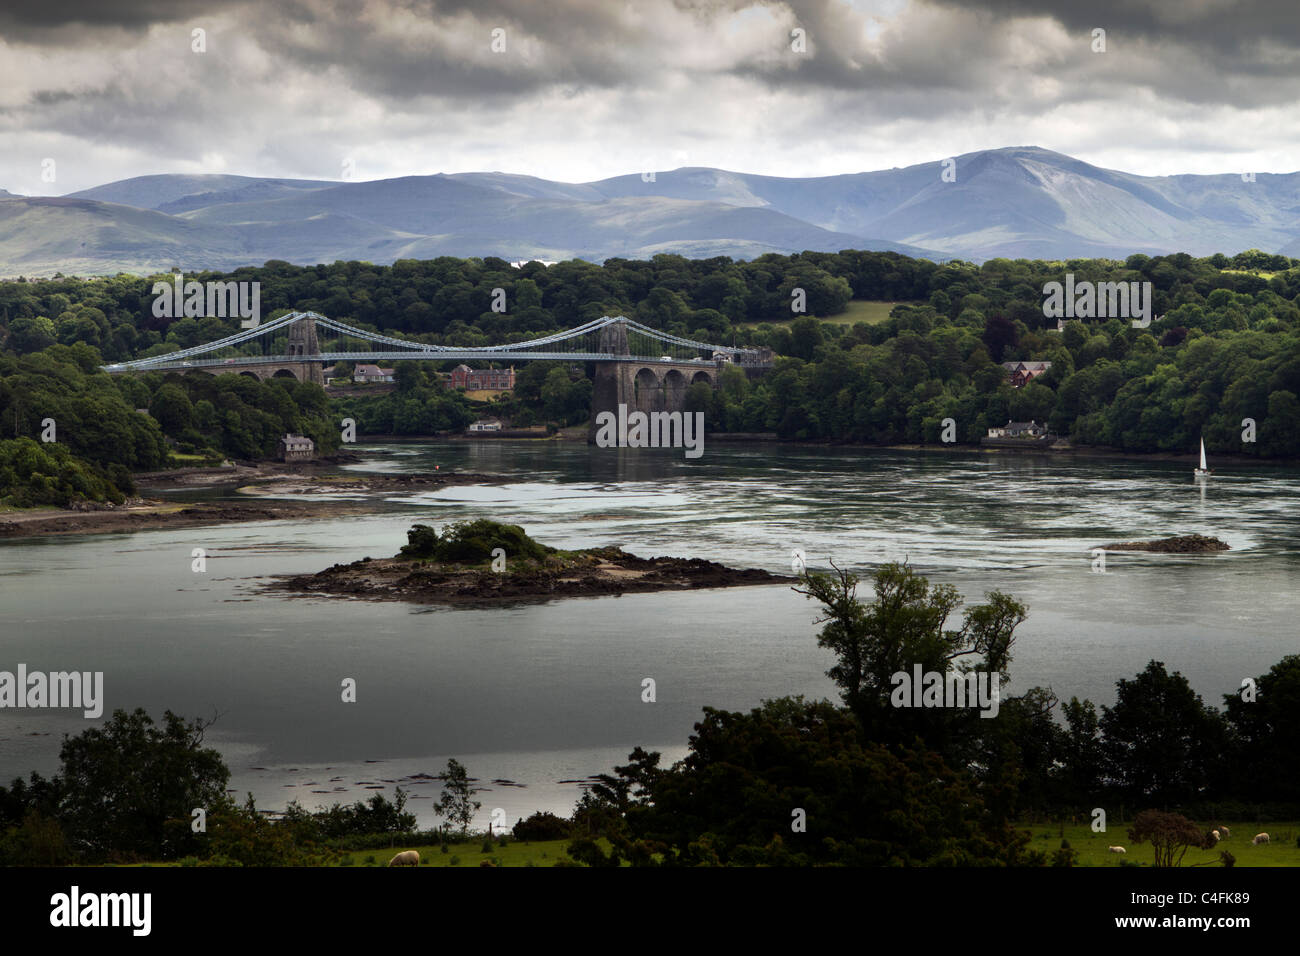 Menai Bridge across the  Menai Strait between Anglesey and mainland Wales, with the mountains of Snowdonia in the background Stock Photo